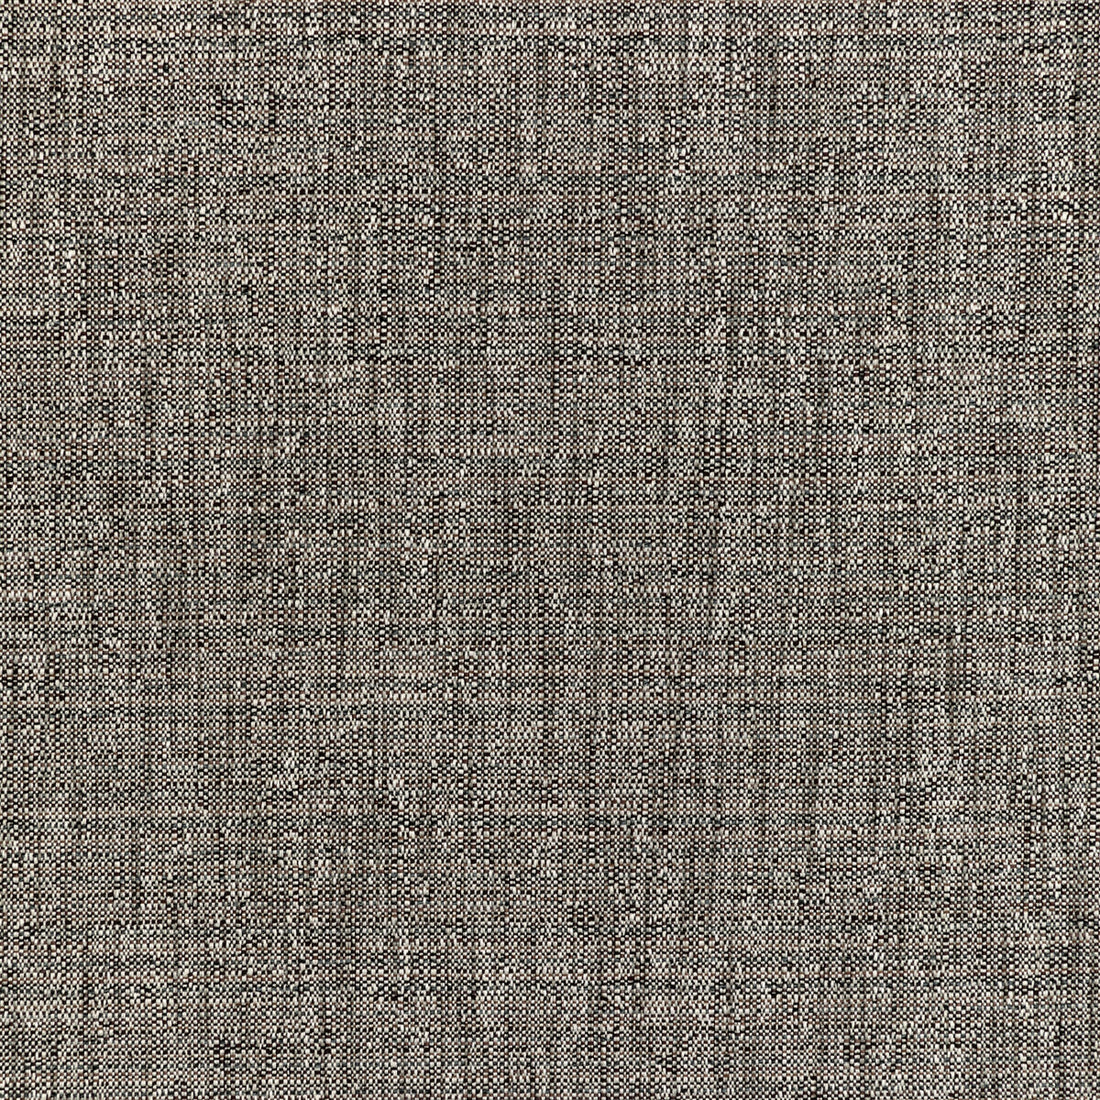 Kravet Smart fabric in 36289-21 color - pattern 36289.21.0 - by Kravet Smart in the Performance Crypton Home collection